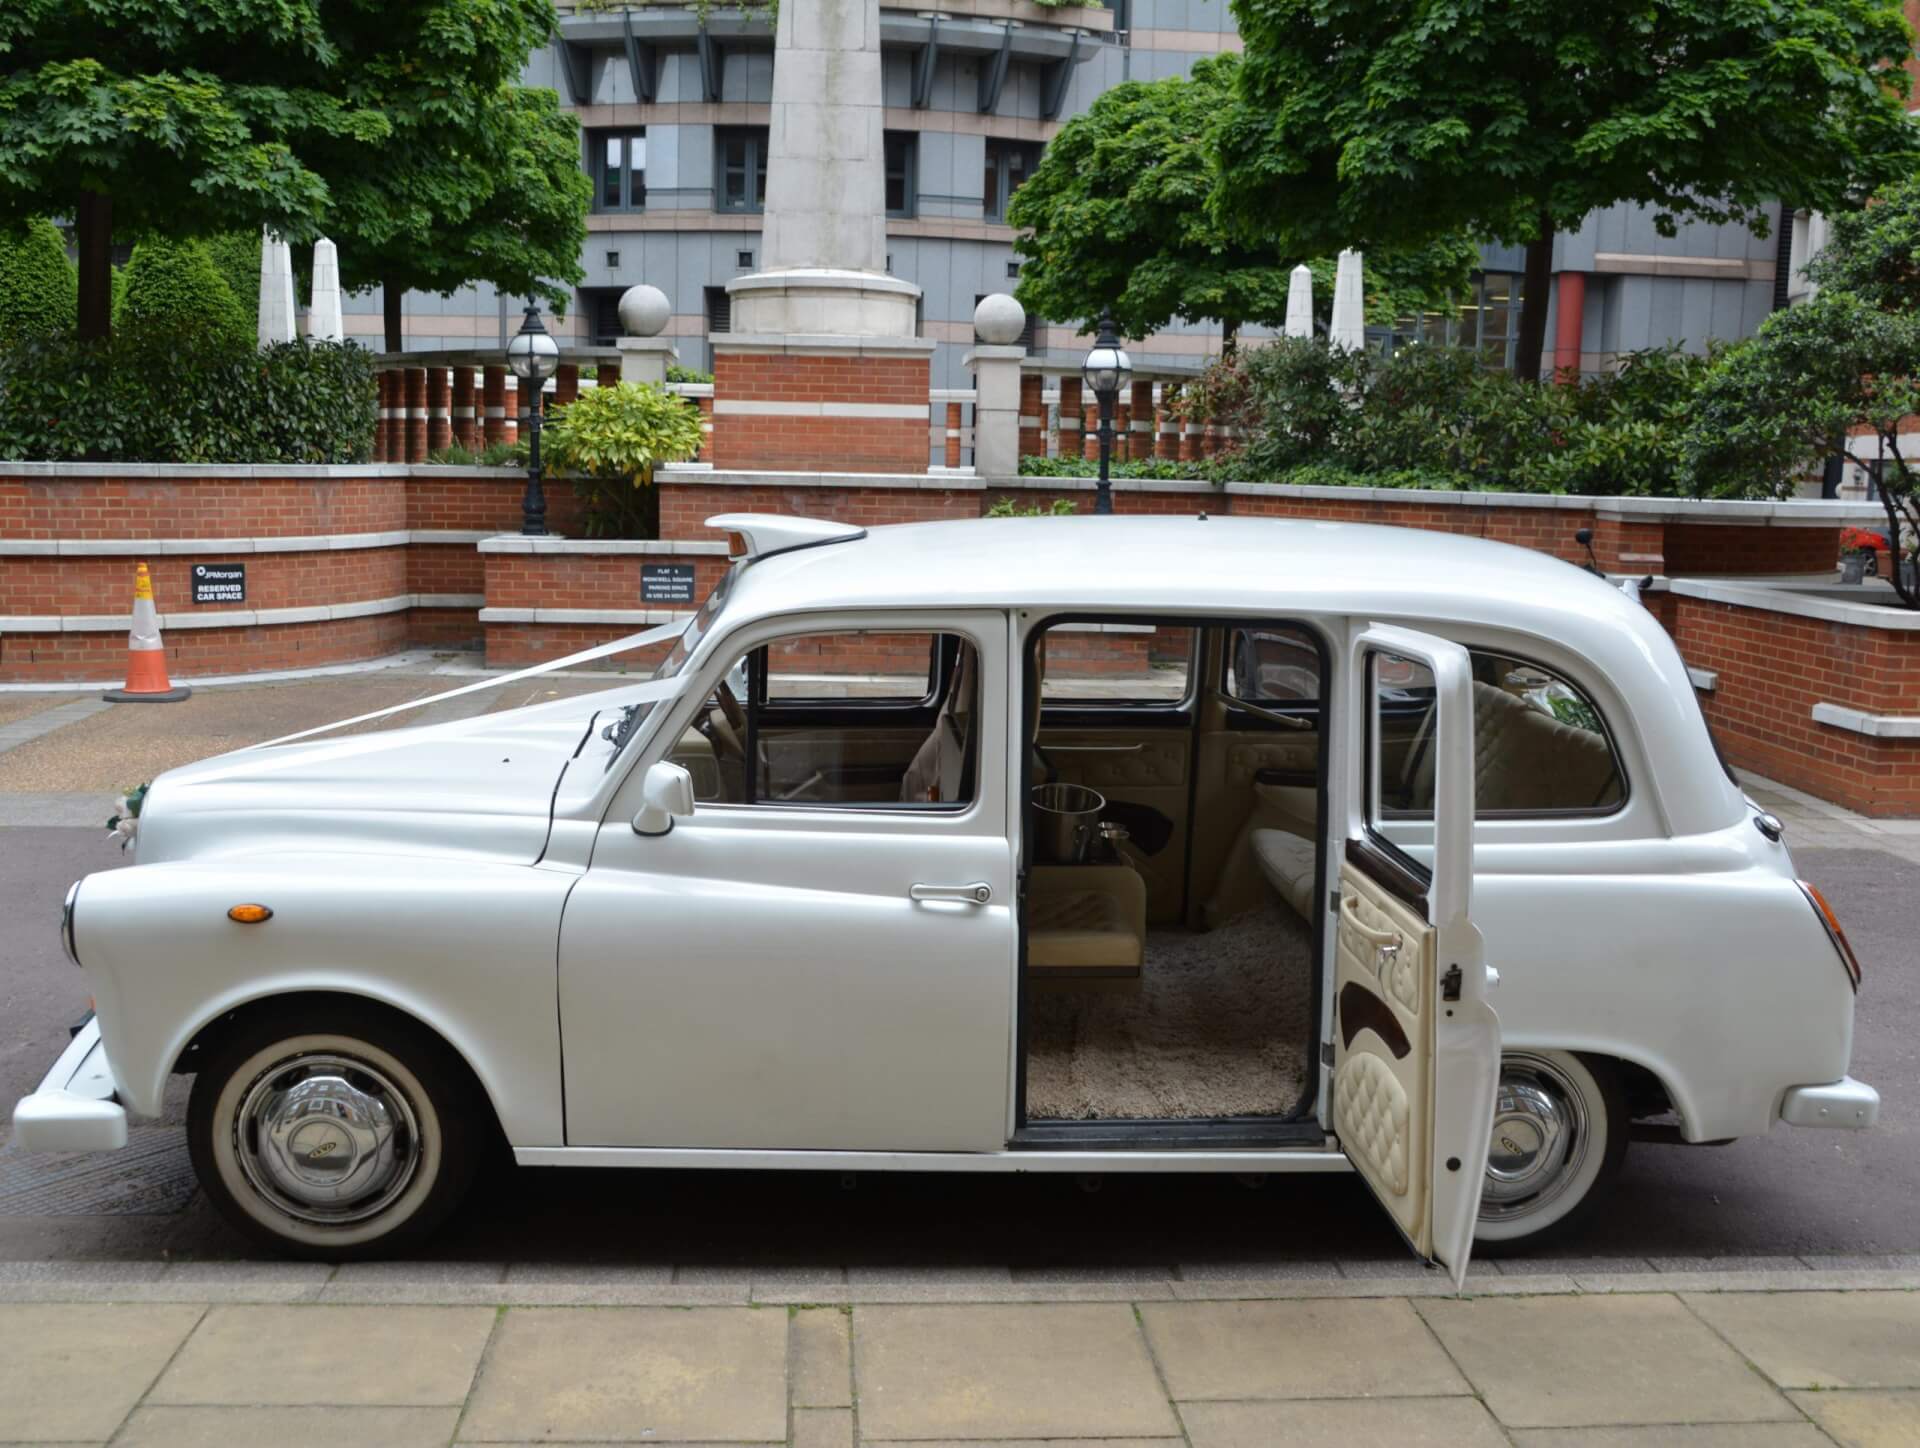 London taxi for weddings